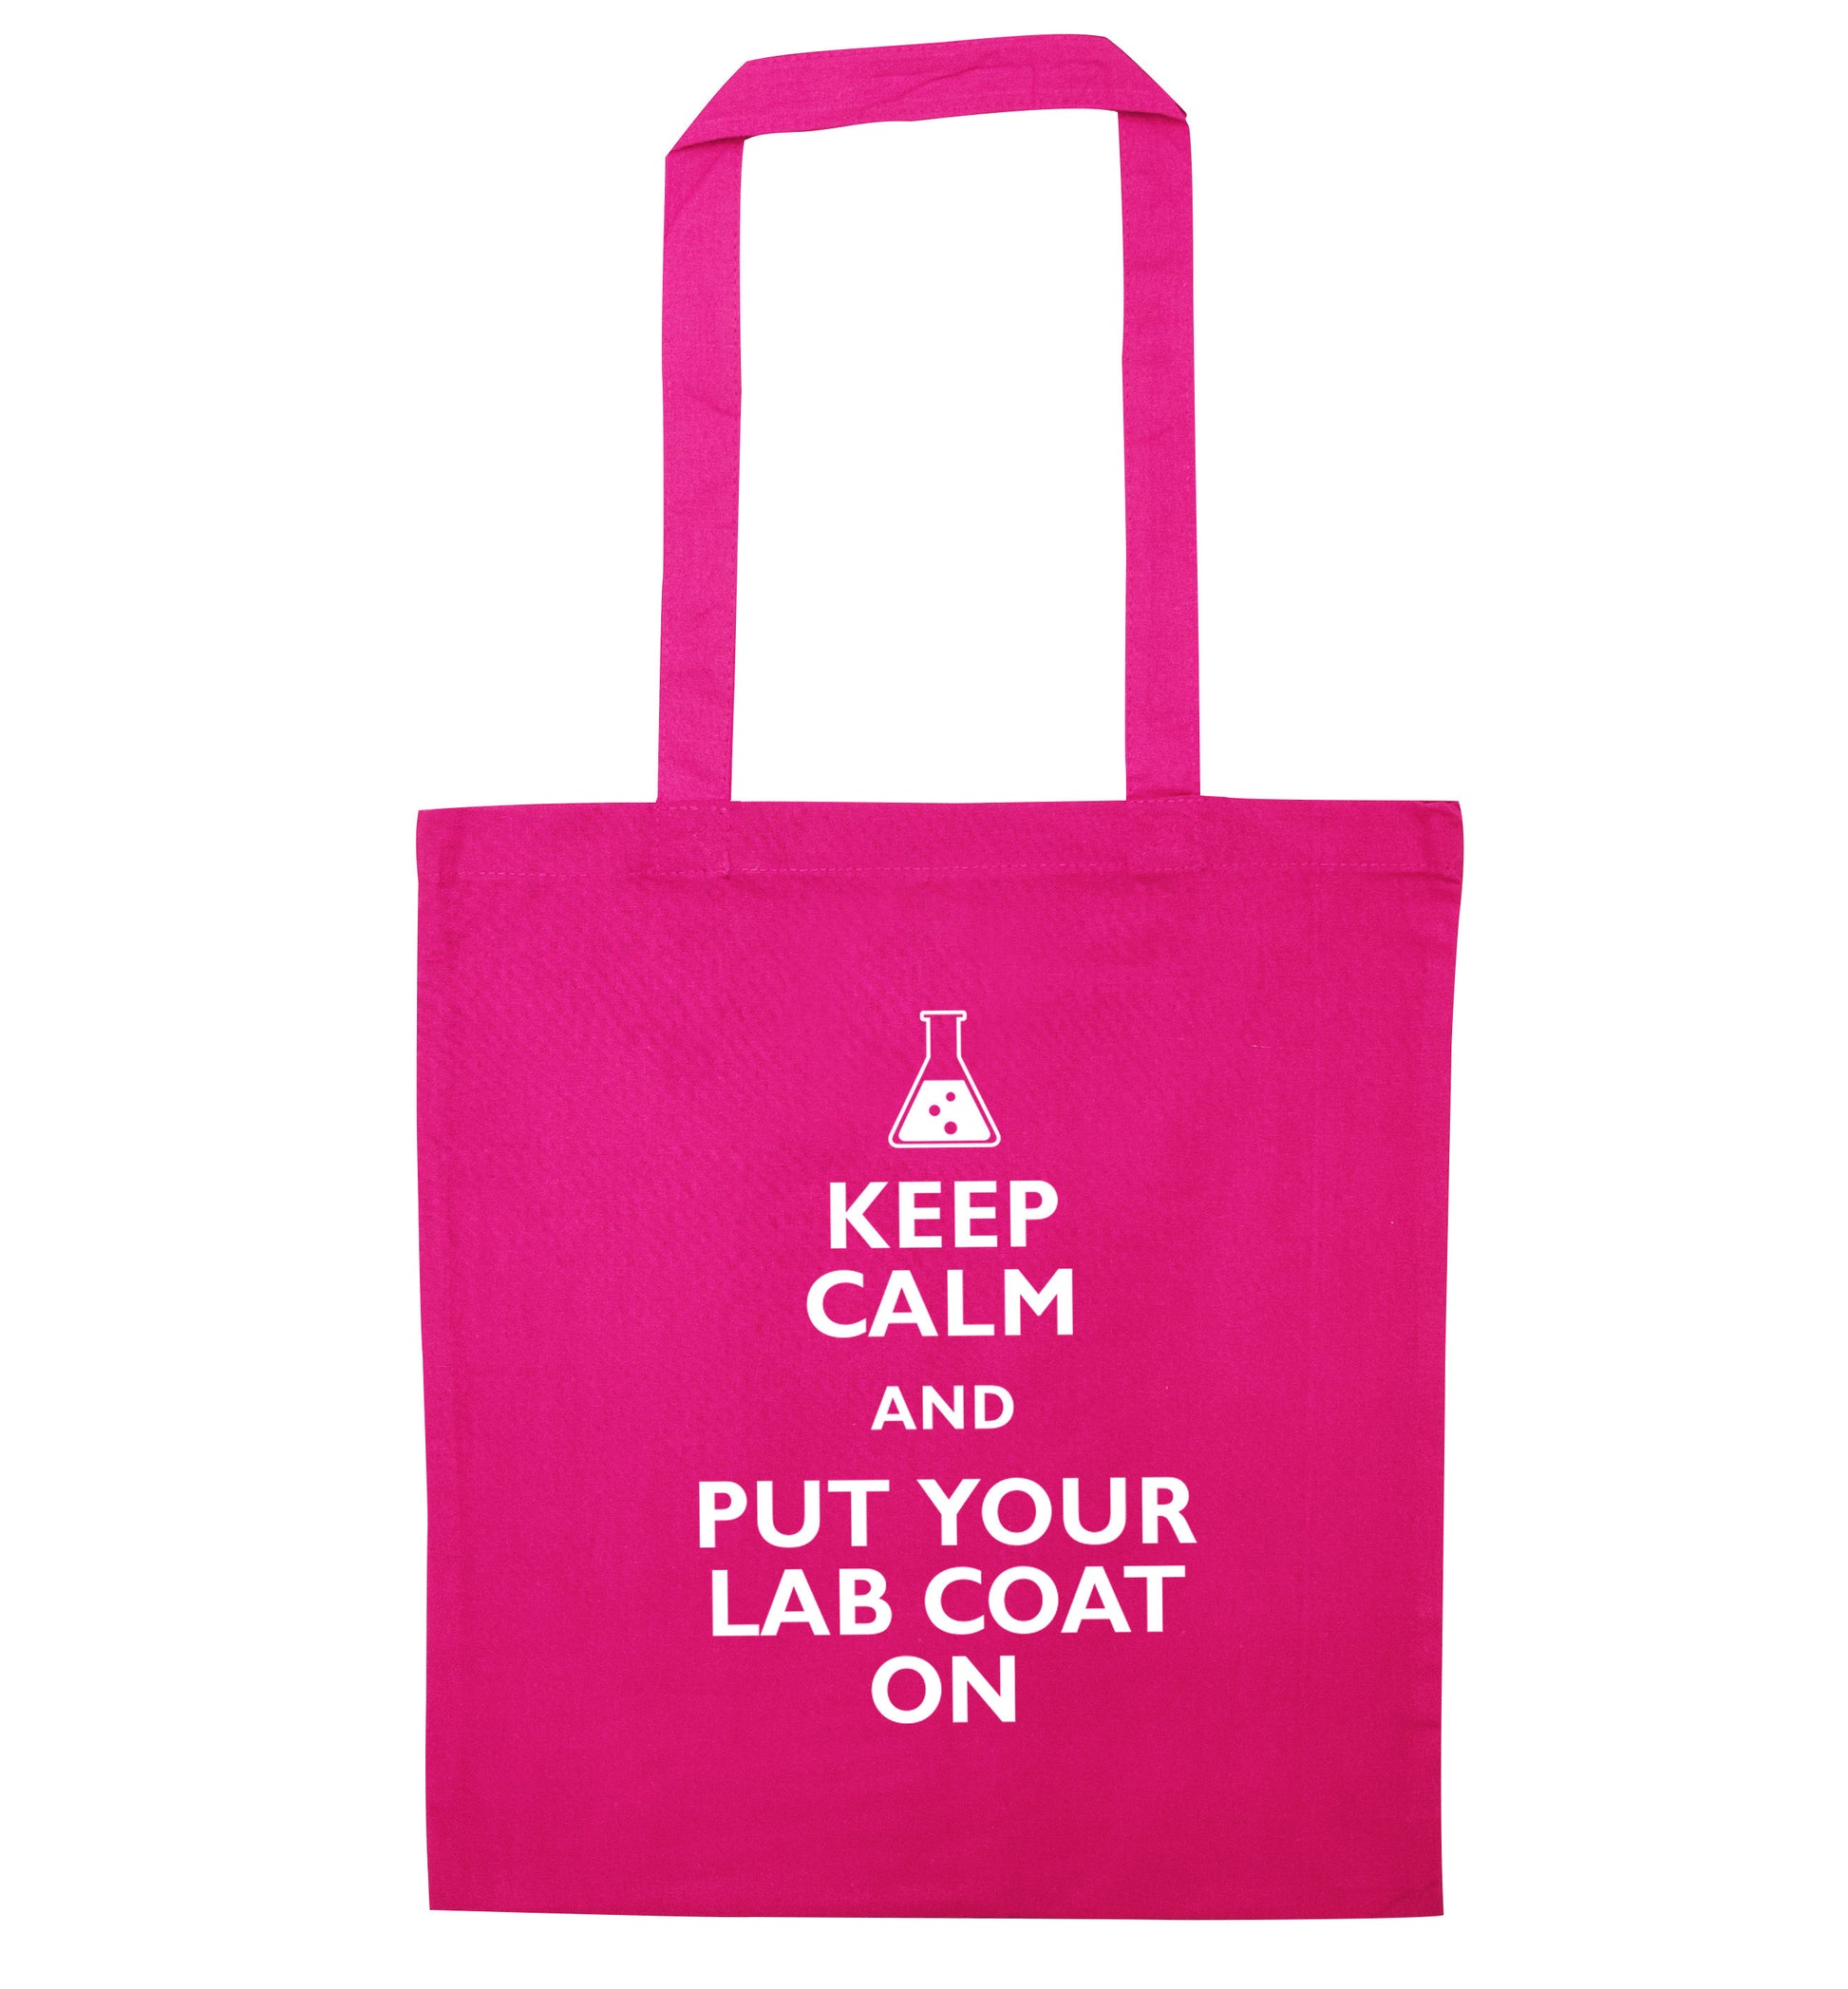 Keep calm and put your lab coat on pink tote bag